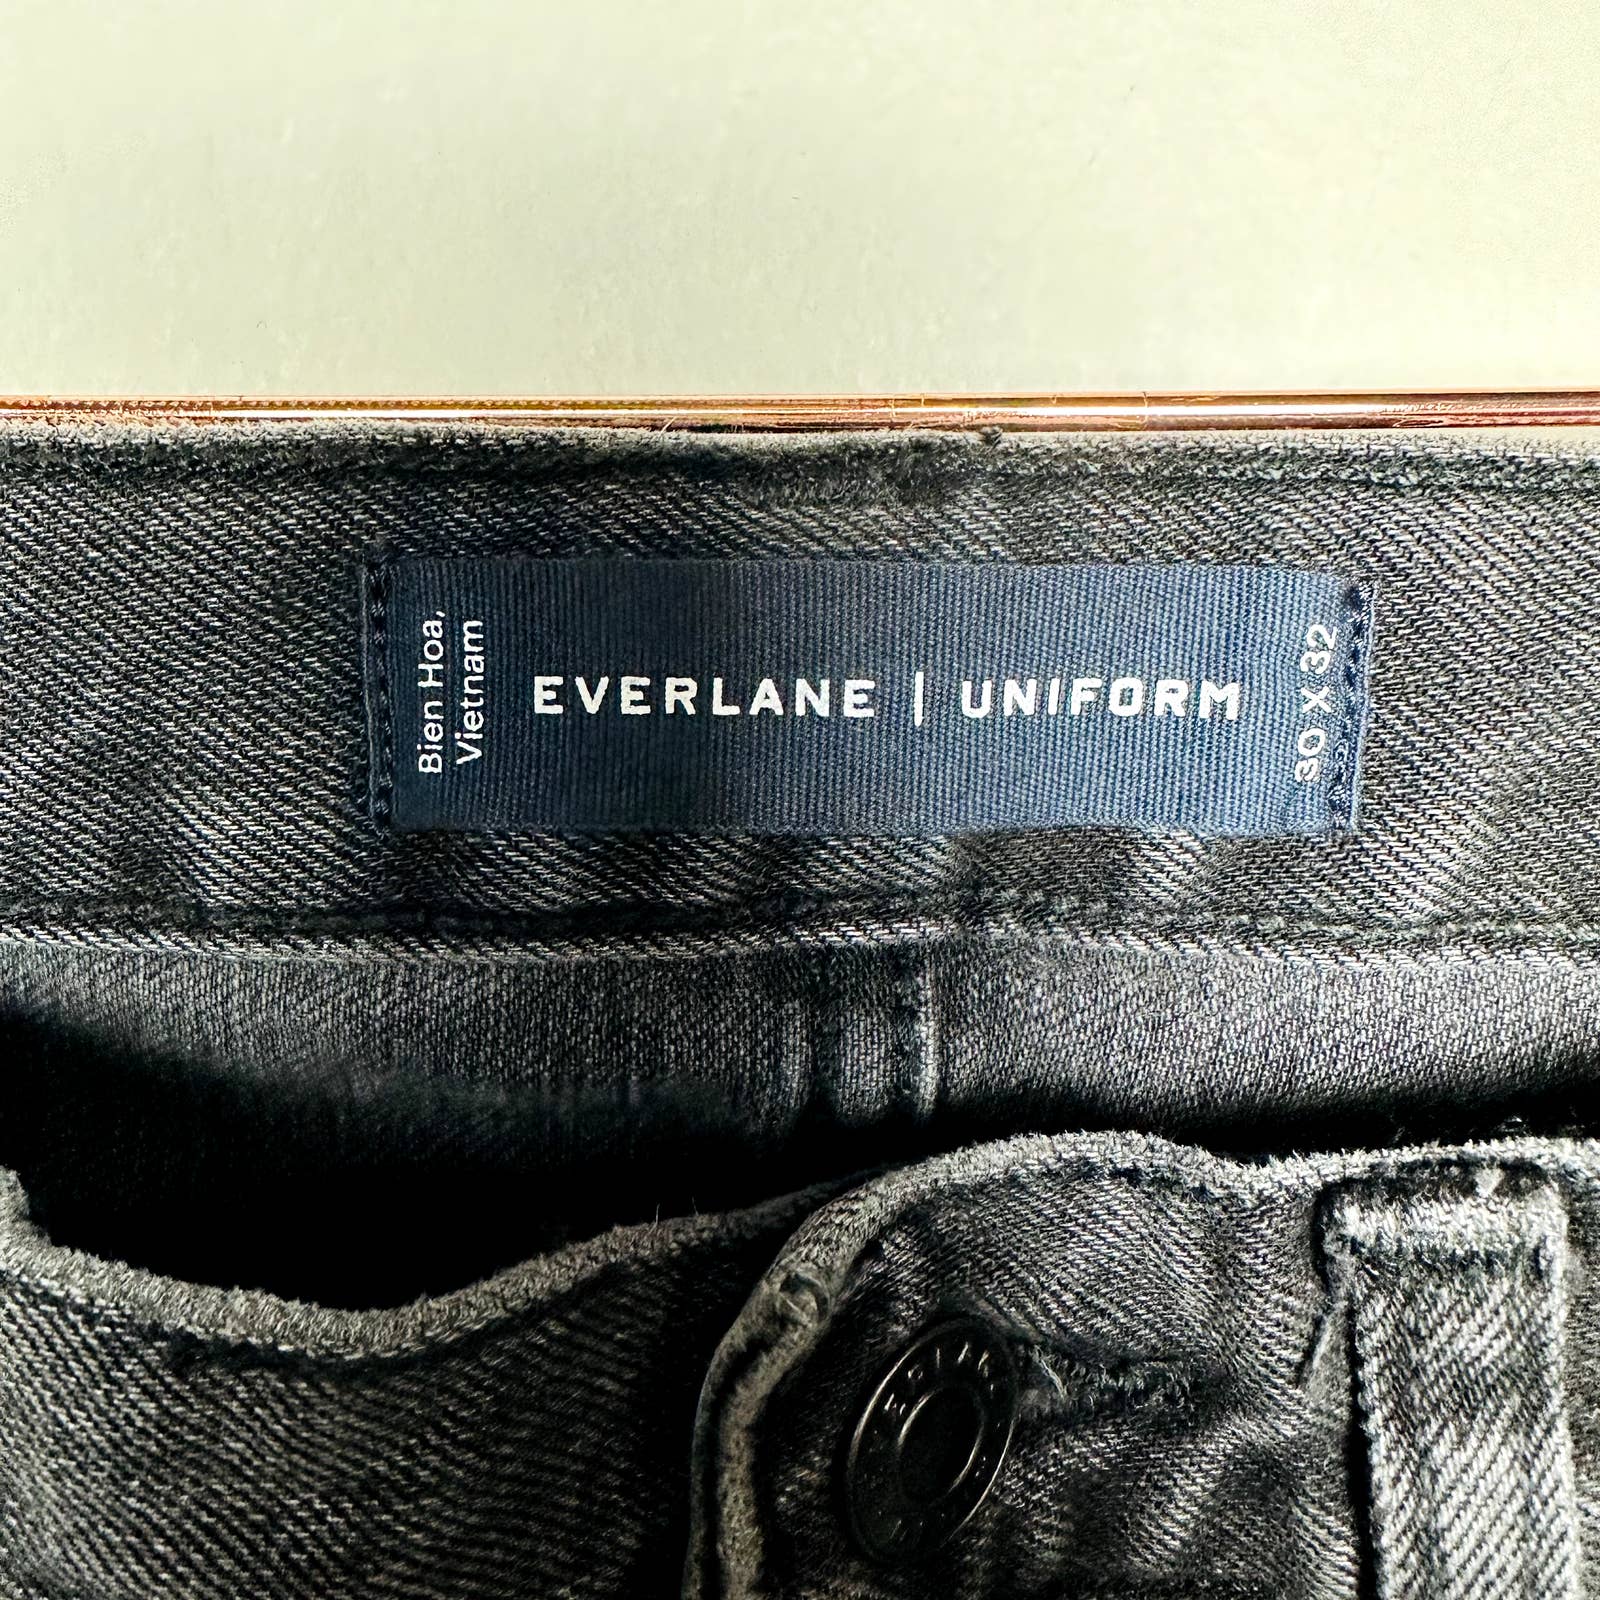 Everlane NWOT Uniform The Skinny Fit Business Casual Jeans Washed Black Sz 30x32